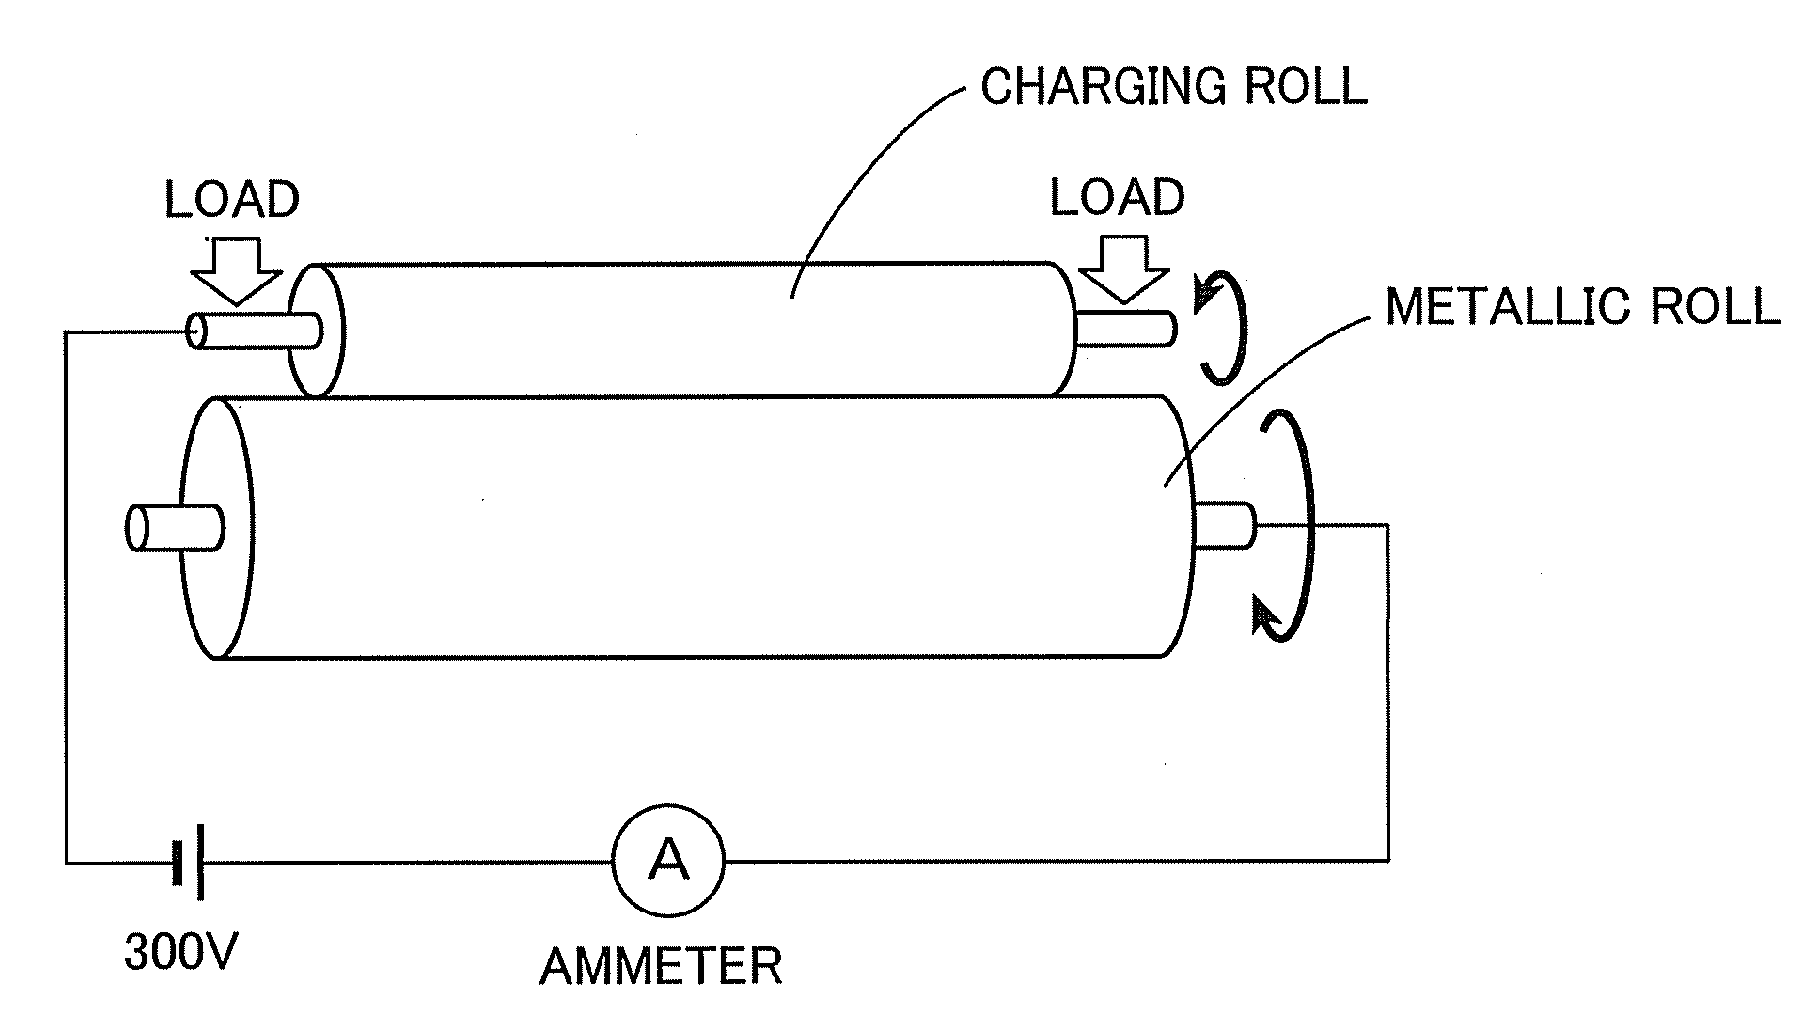 Charging roll